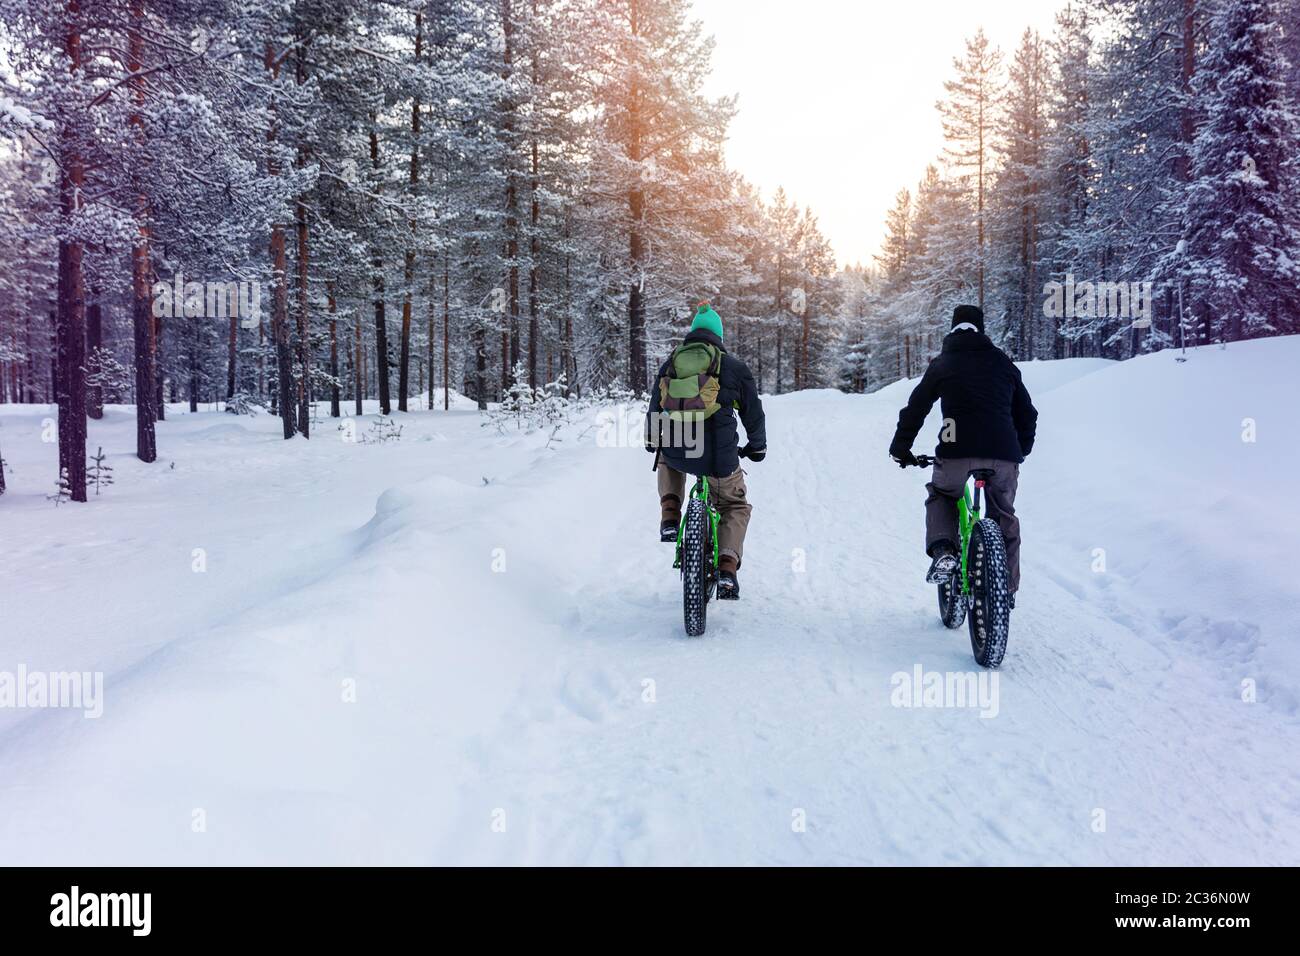 two people with fat bikes riding snowy winter forest trail in finland Stock Photo